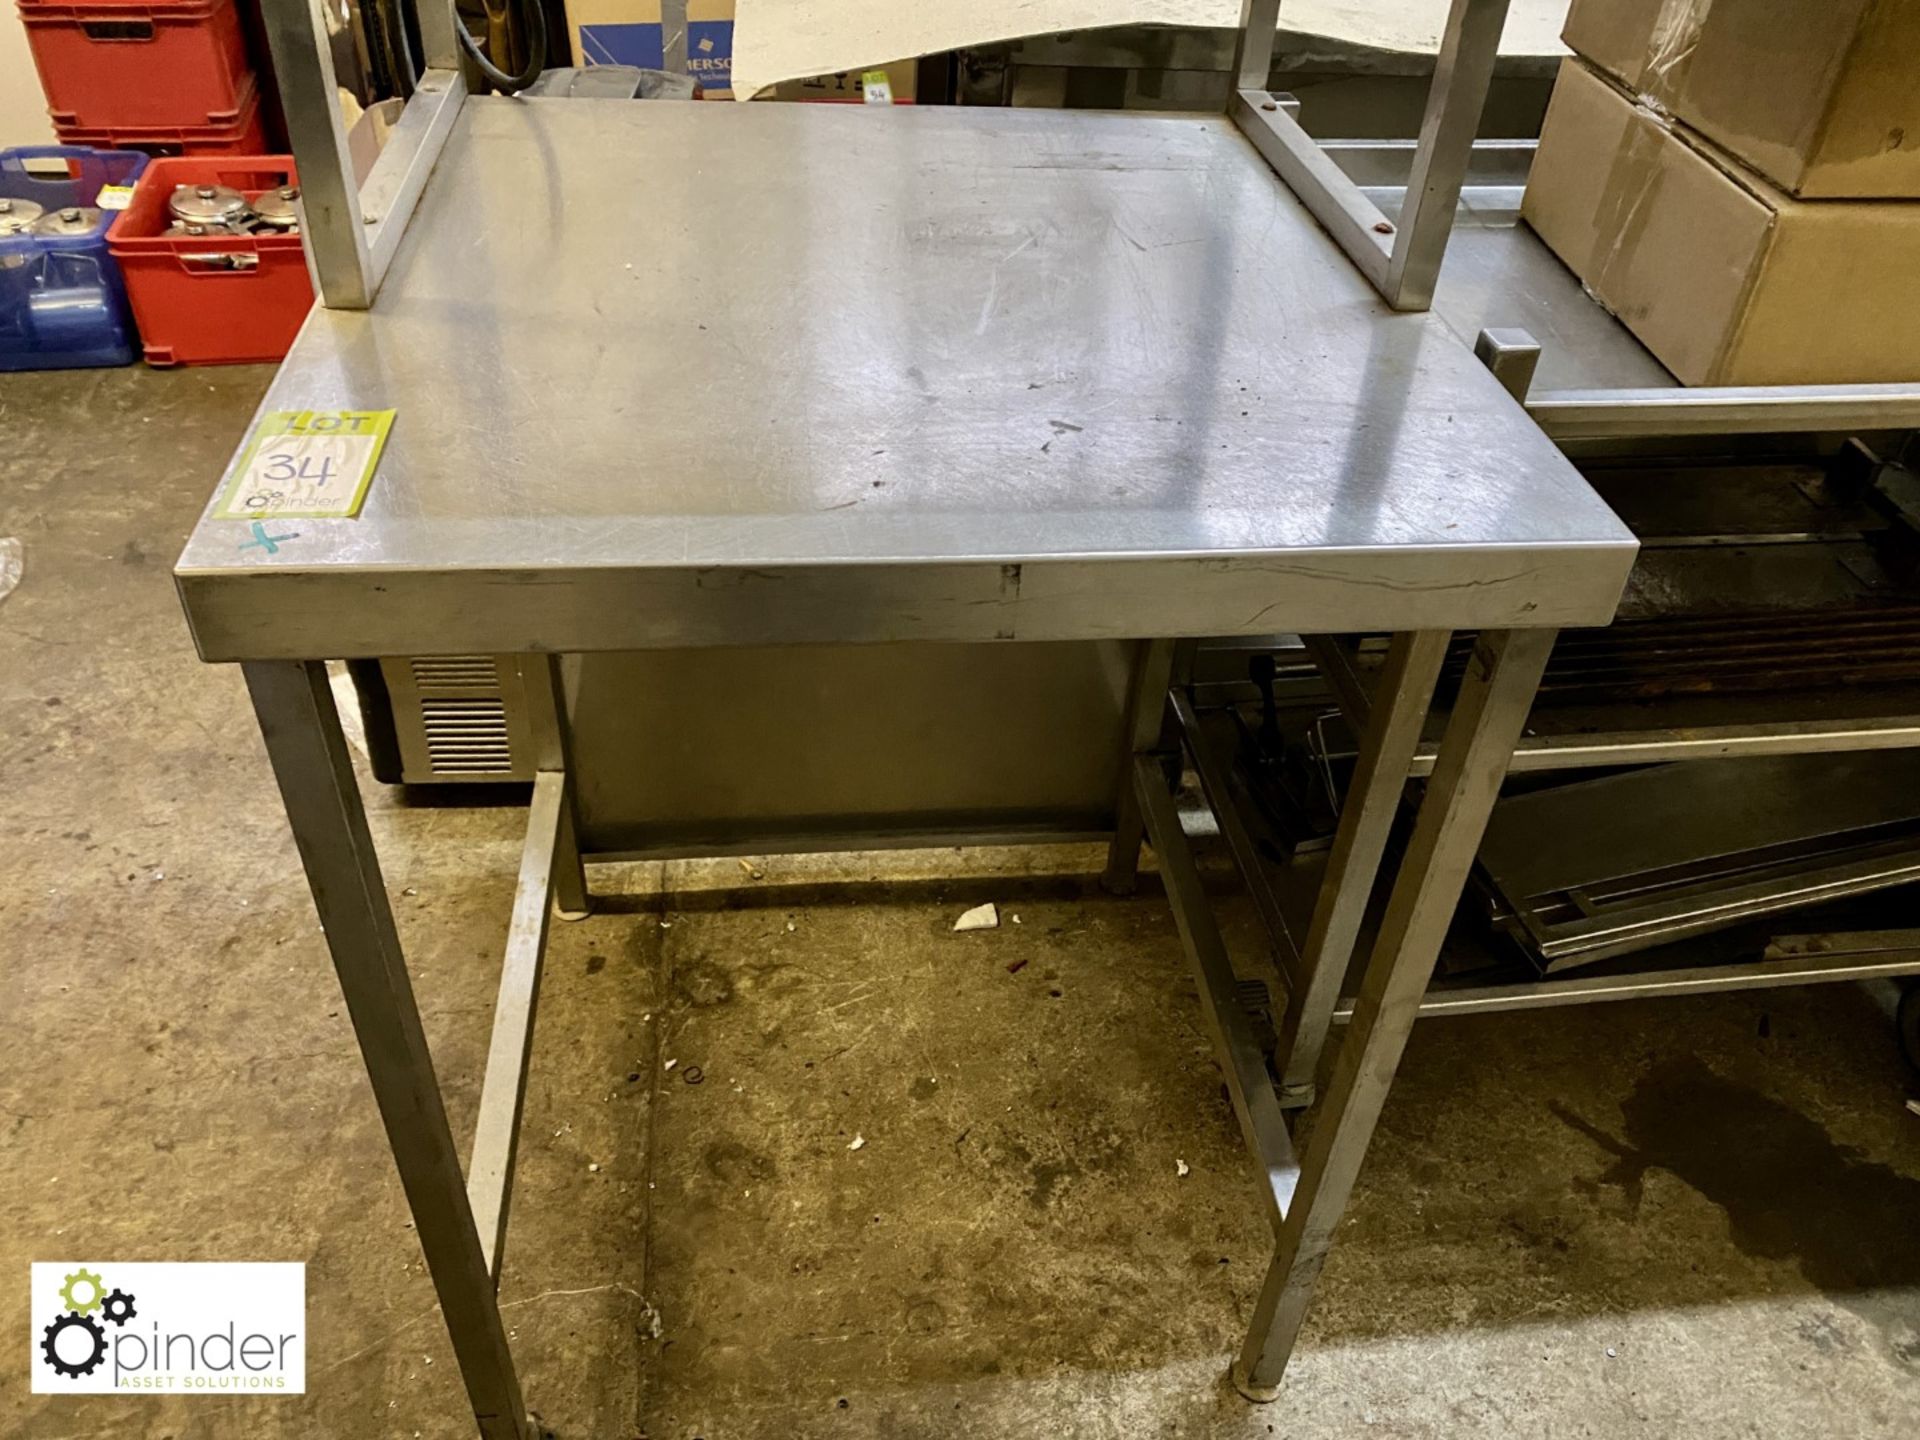 Stainless steel Preparation Table, 695mm x 700mm x 900mm, with additional shelf - Image 2 of 2